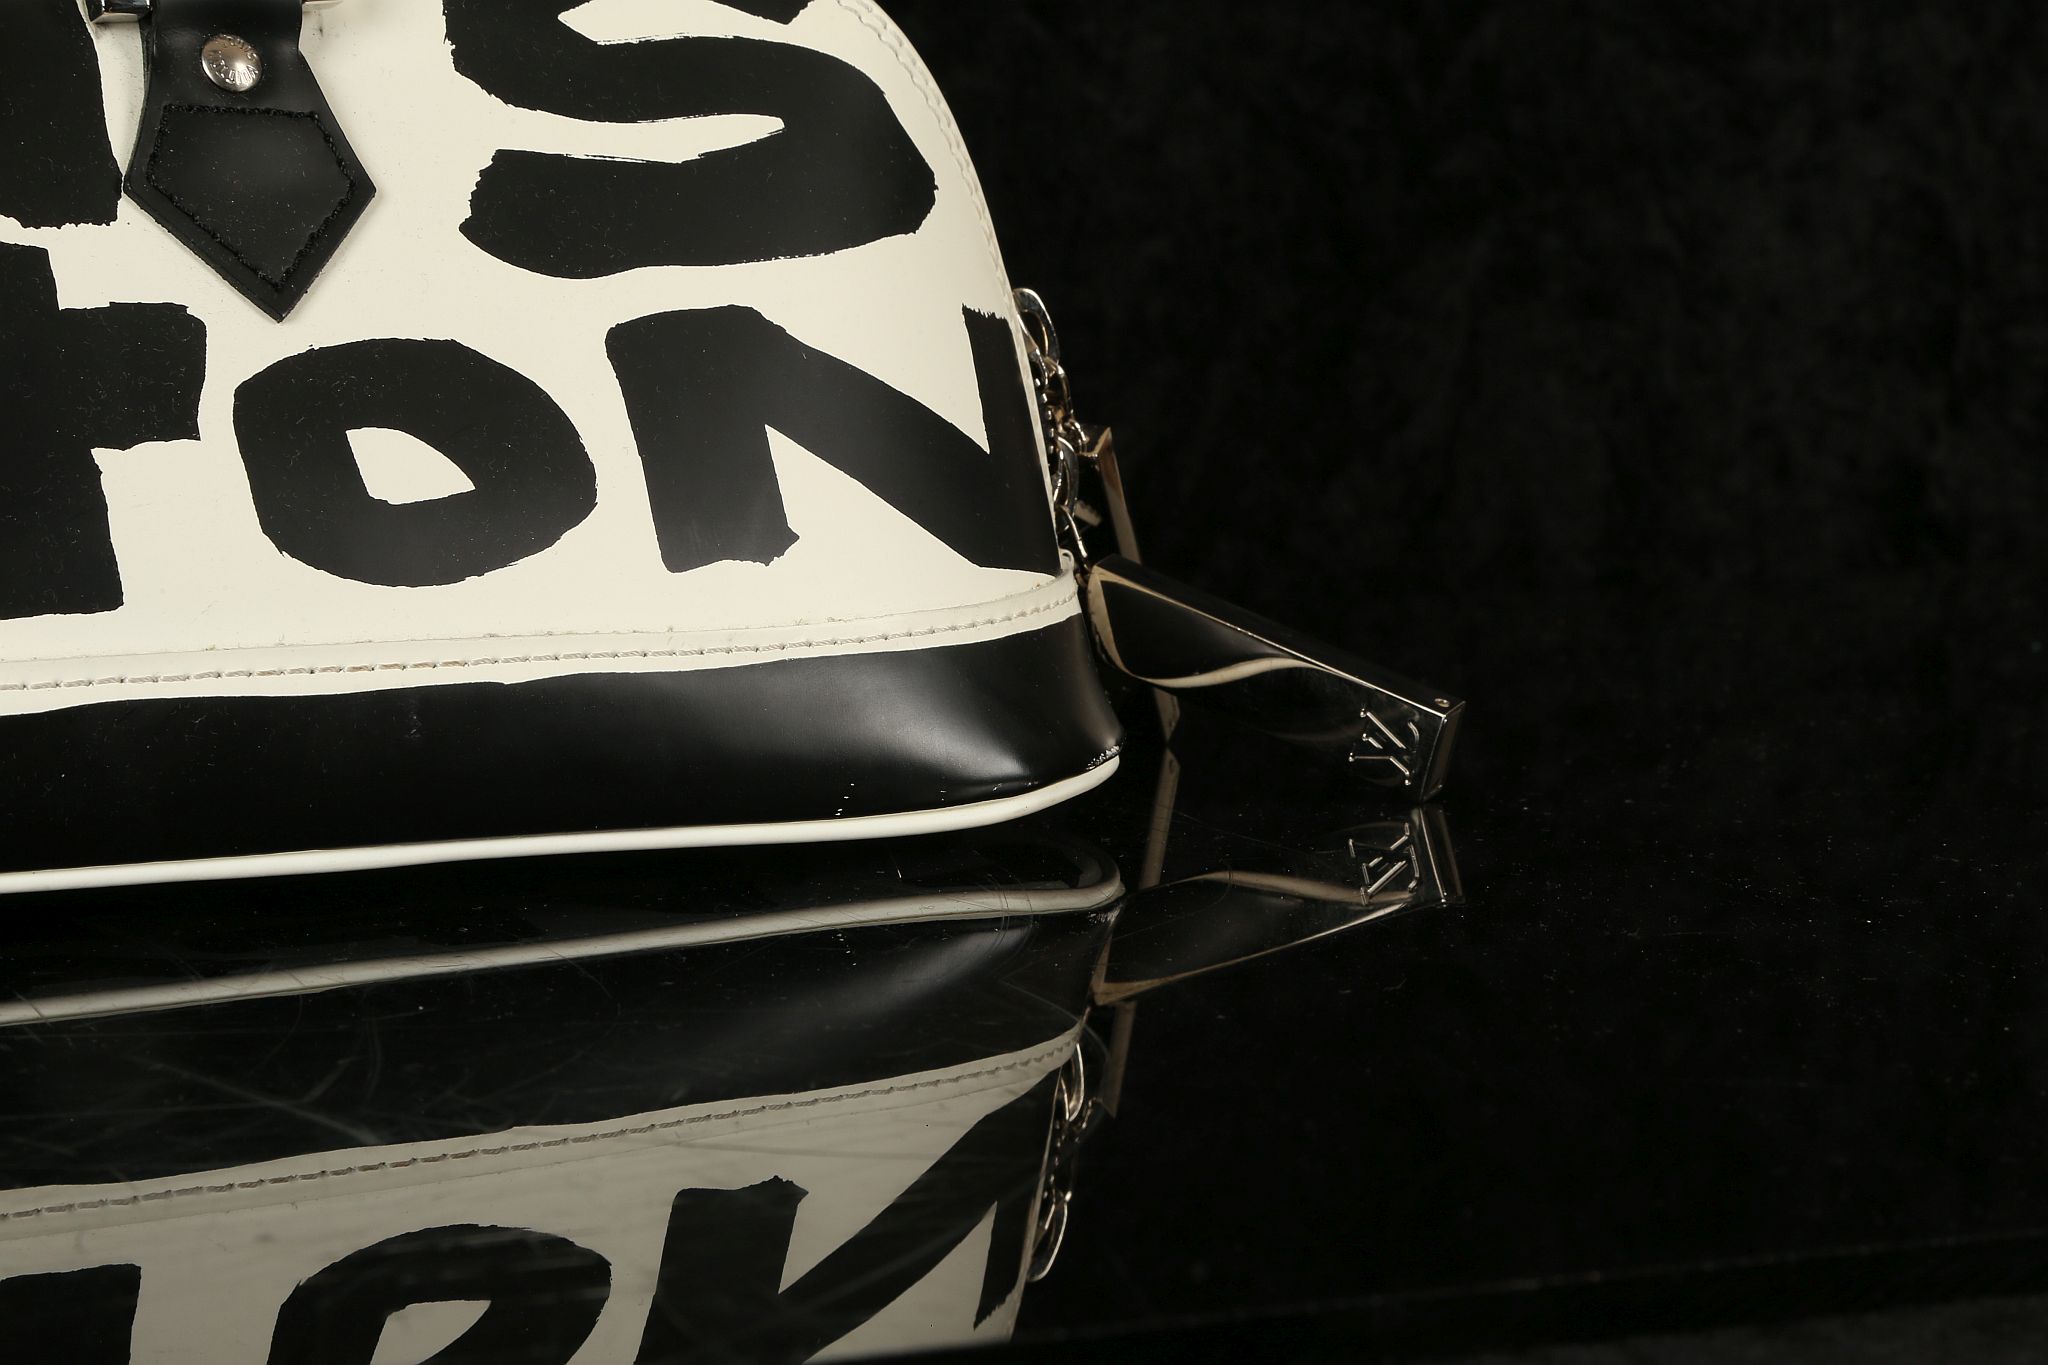 LOUIS VUITTON STEPHEN SPROUSE EAST/WEST ALMA BAG, date code for 2001, black and white graffiti - Image 3 of 14